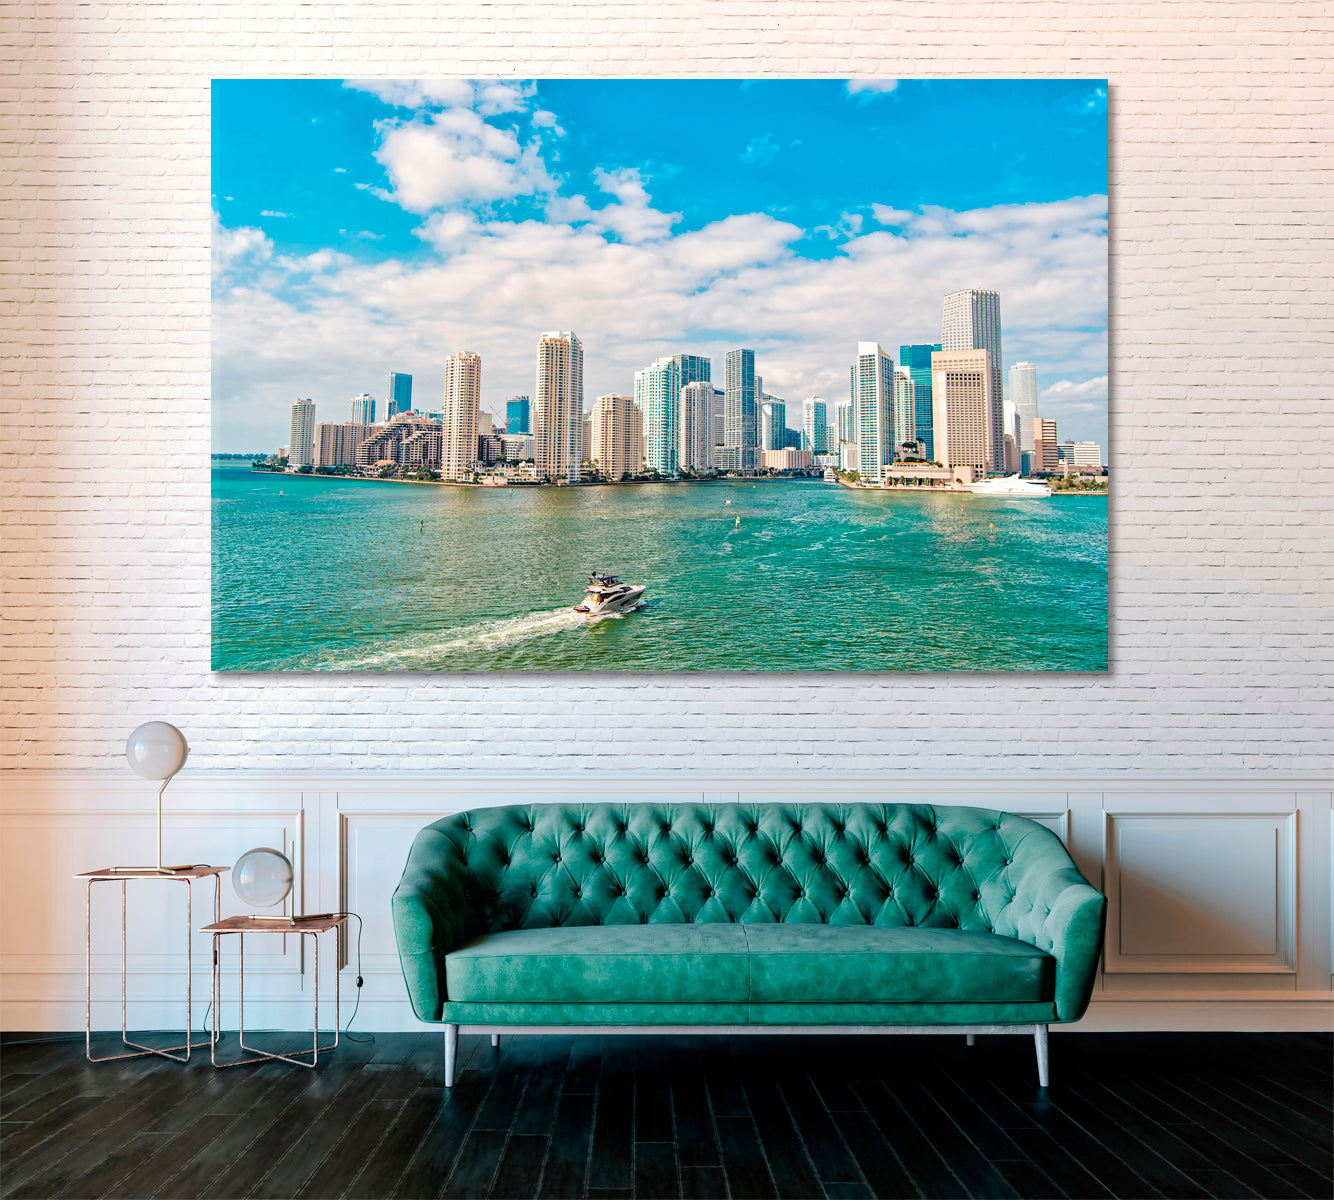 Downtown Miami Canvas Print ArtLexy 1 Panel 24"x16" inches 